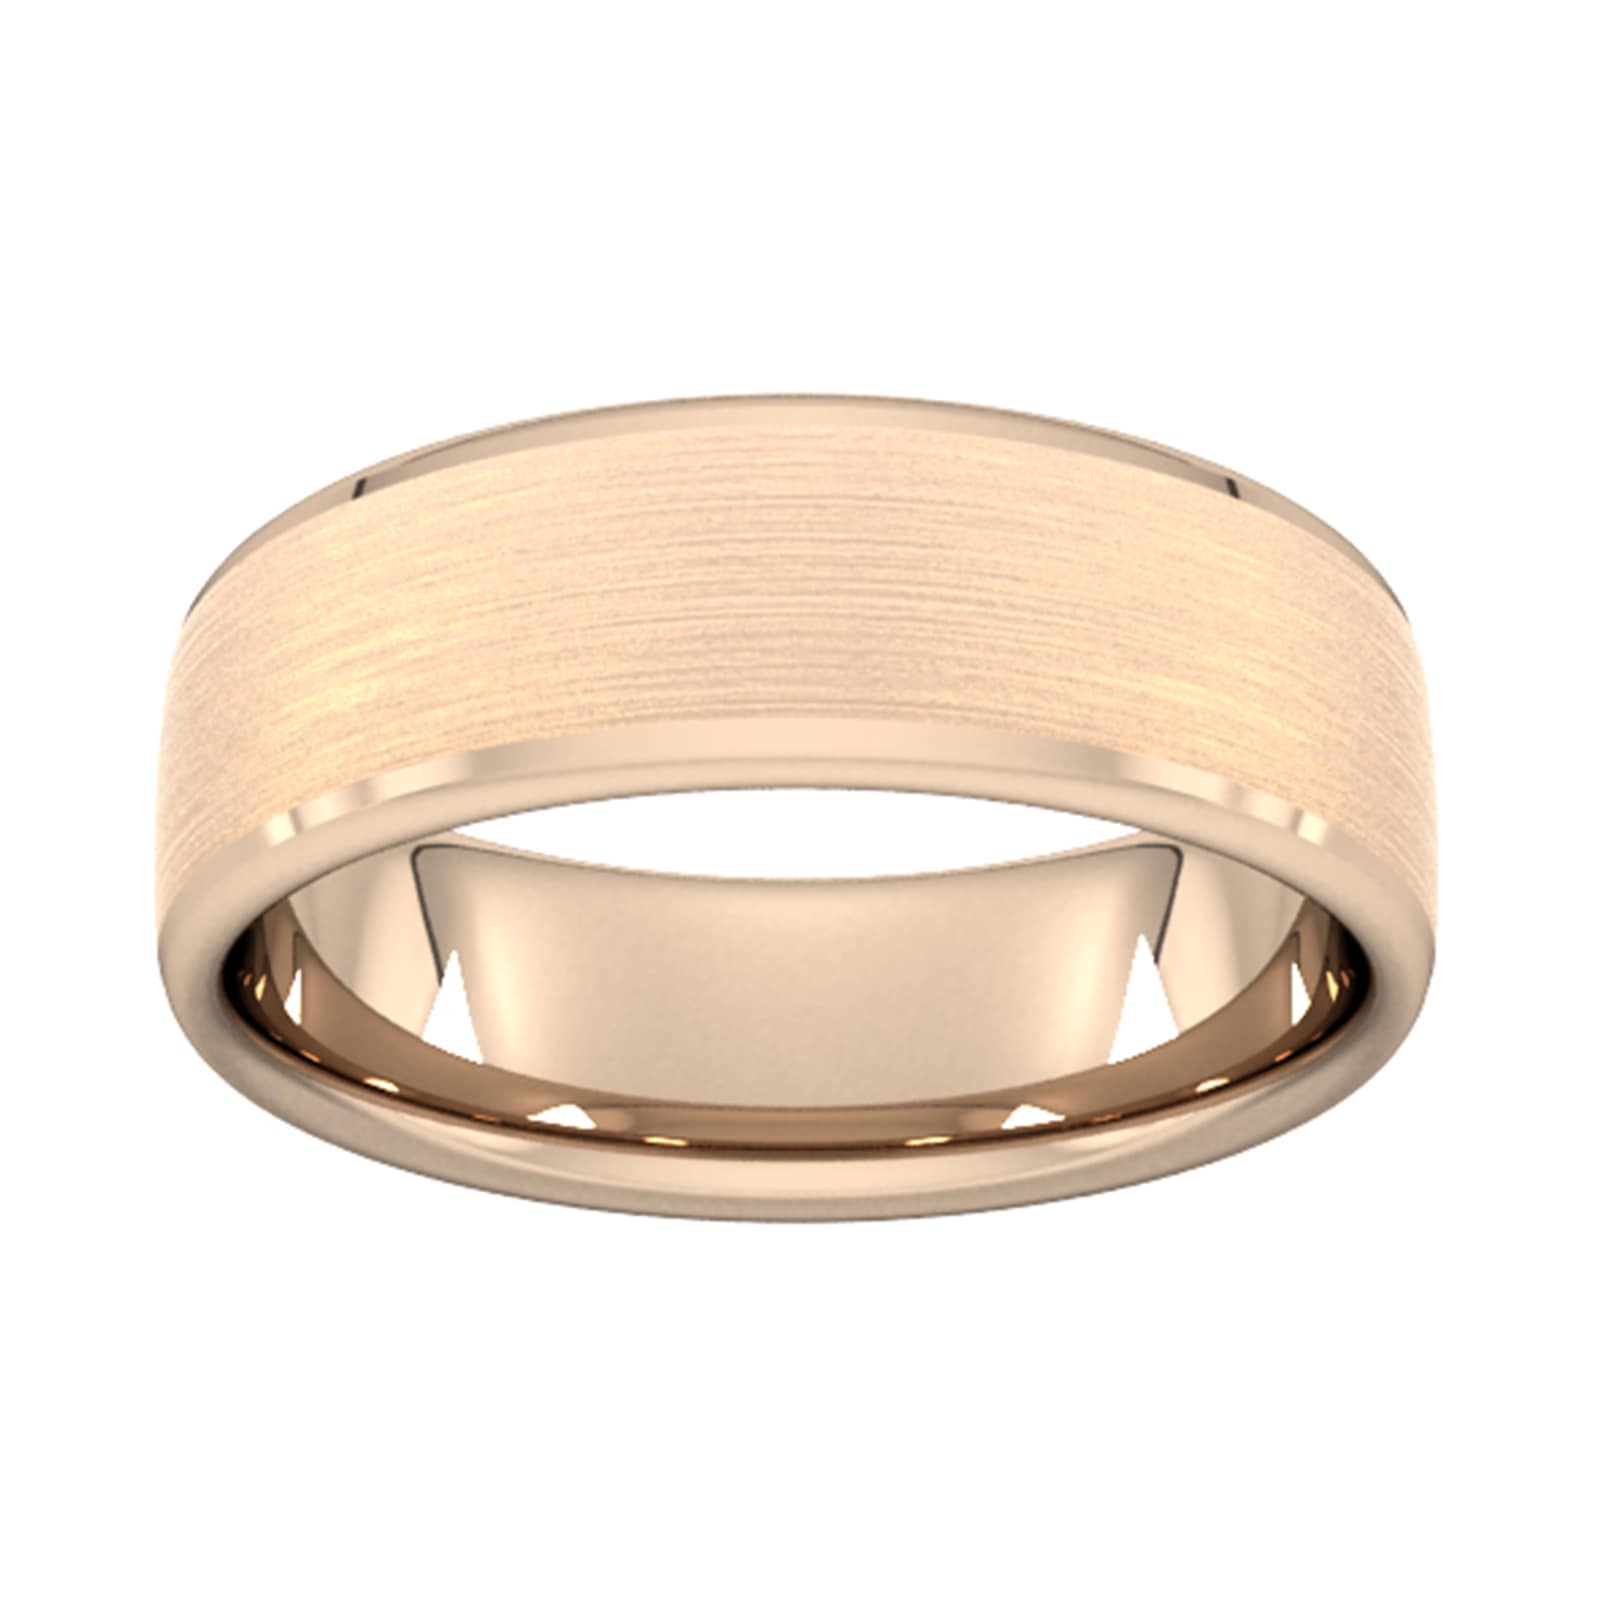 7mm Traditional Court Heavy Polished Chamfered Edges With Matt Centre Wedding Ring In 9 Carat Rose Gold - Ring Size N